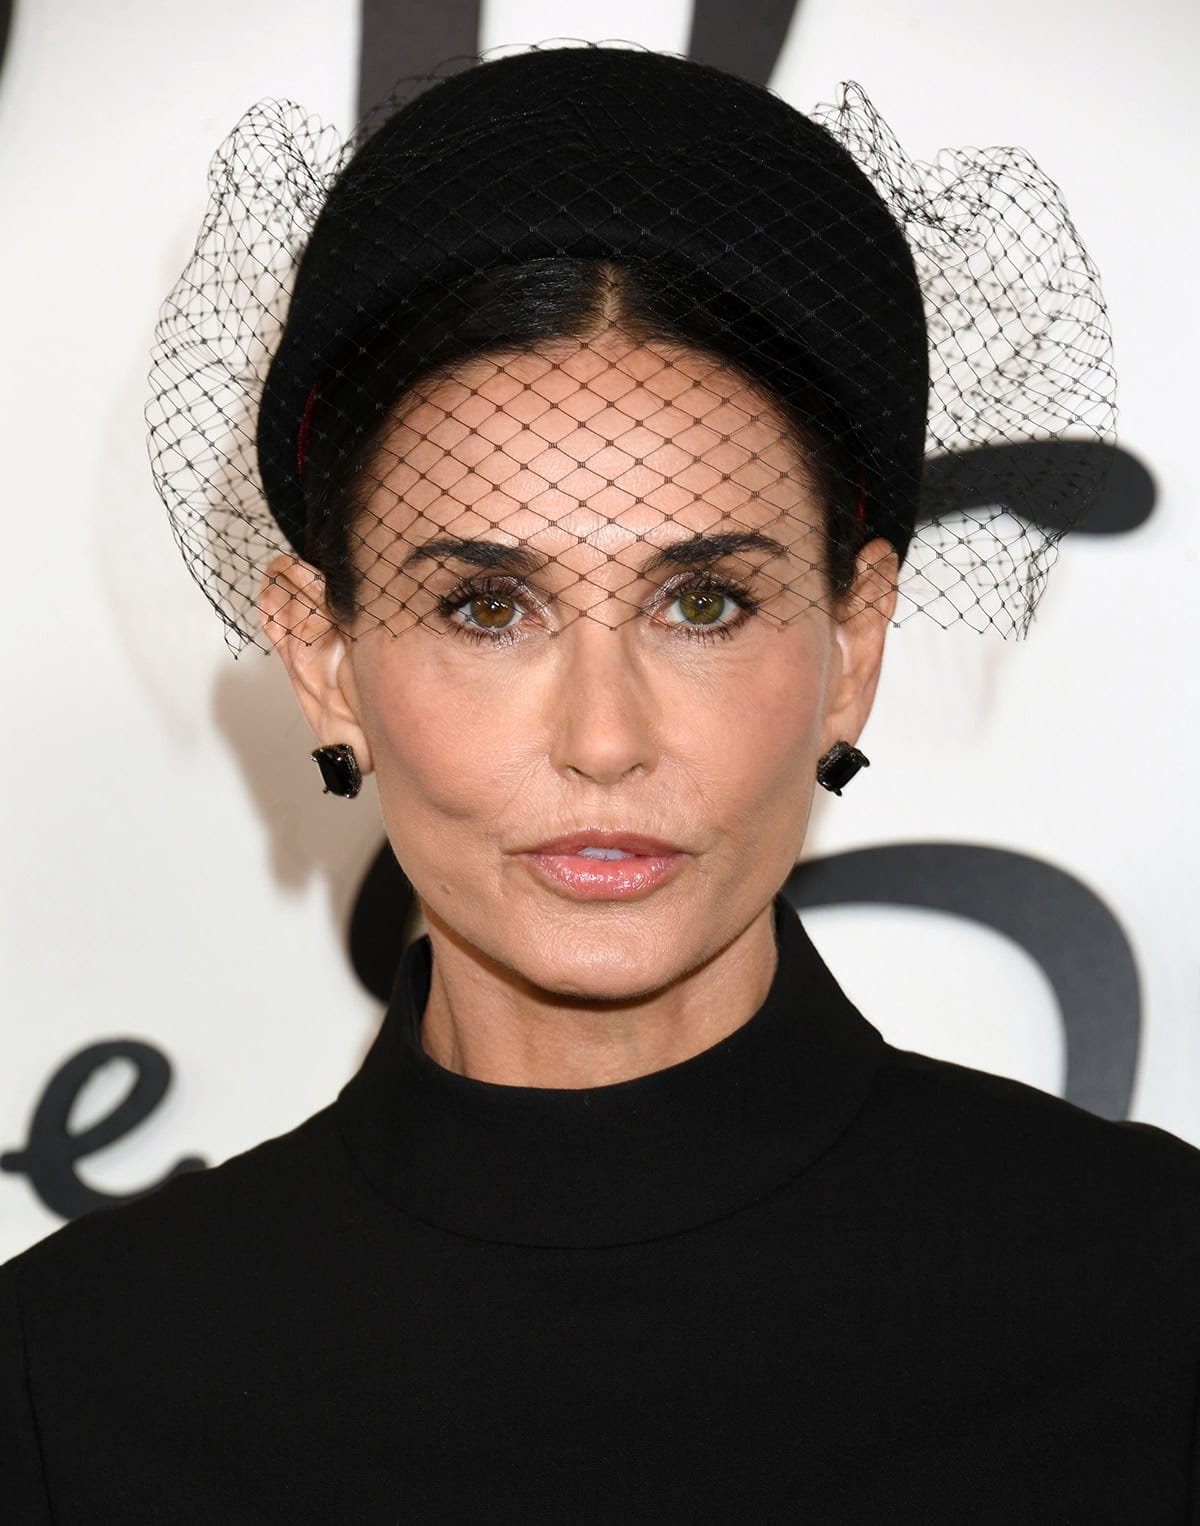 Demi Moore wears Anabela Chan’s Black Diamond Cushion Wing stud earrings and highlights her features with smudged eyeliner, smokey eyeshadow, and pink lips